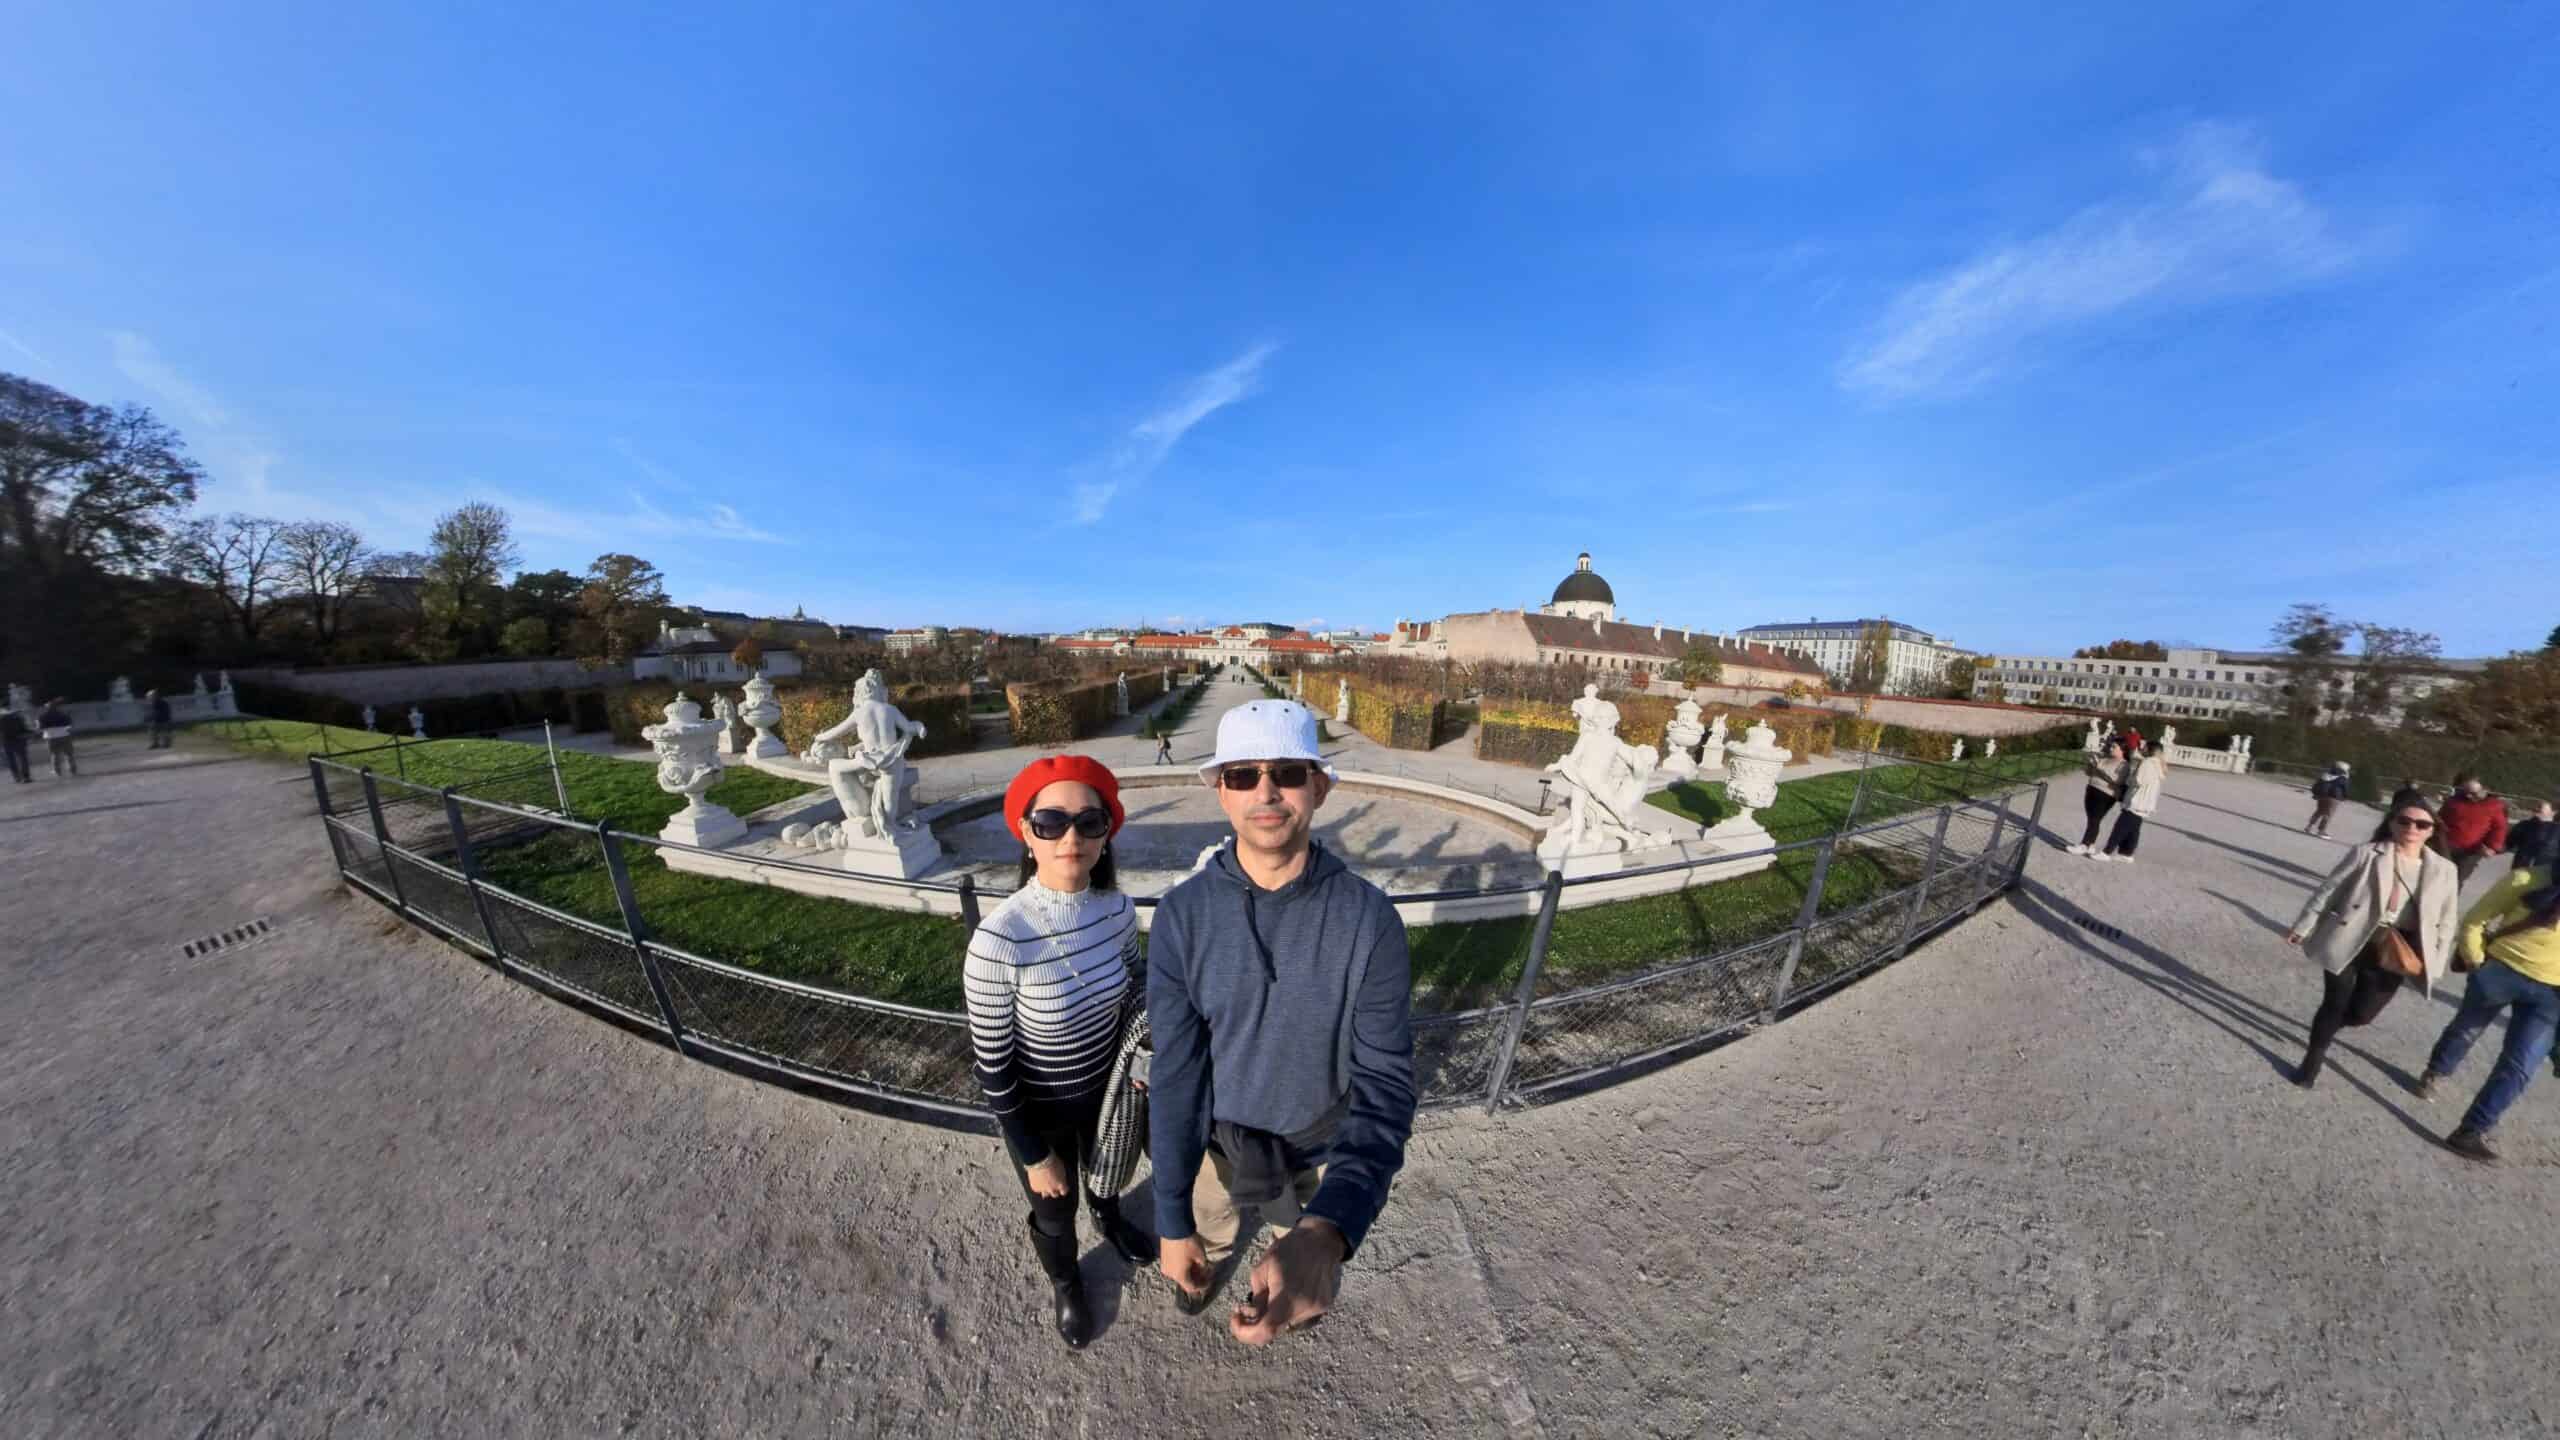 Photo with 360 camera with invisible selfie stick. Float in air effect.